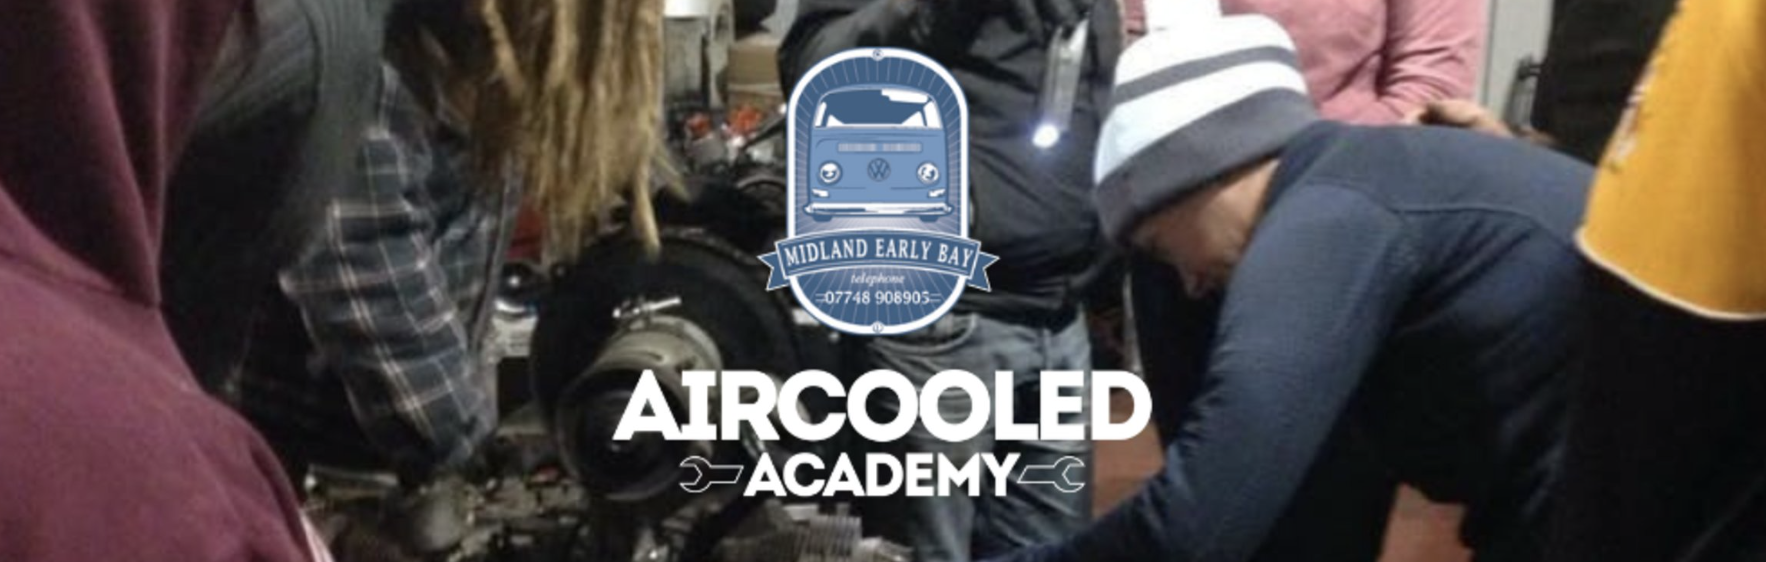 Aircooled Workshop Level 2 Course